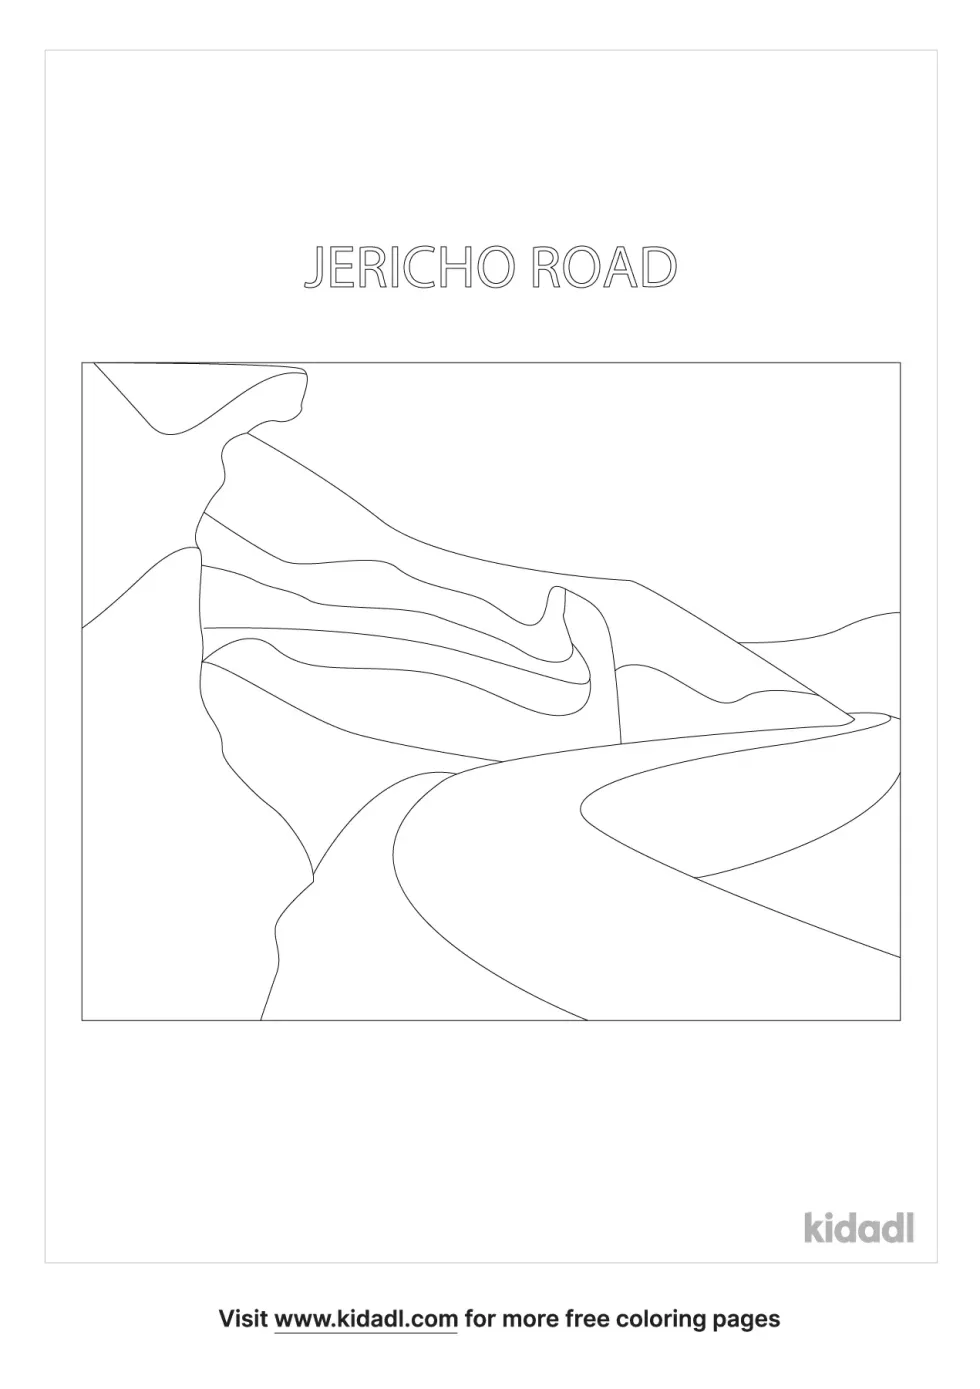 Jericho Road Coloring Page